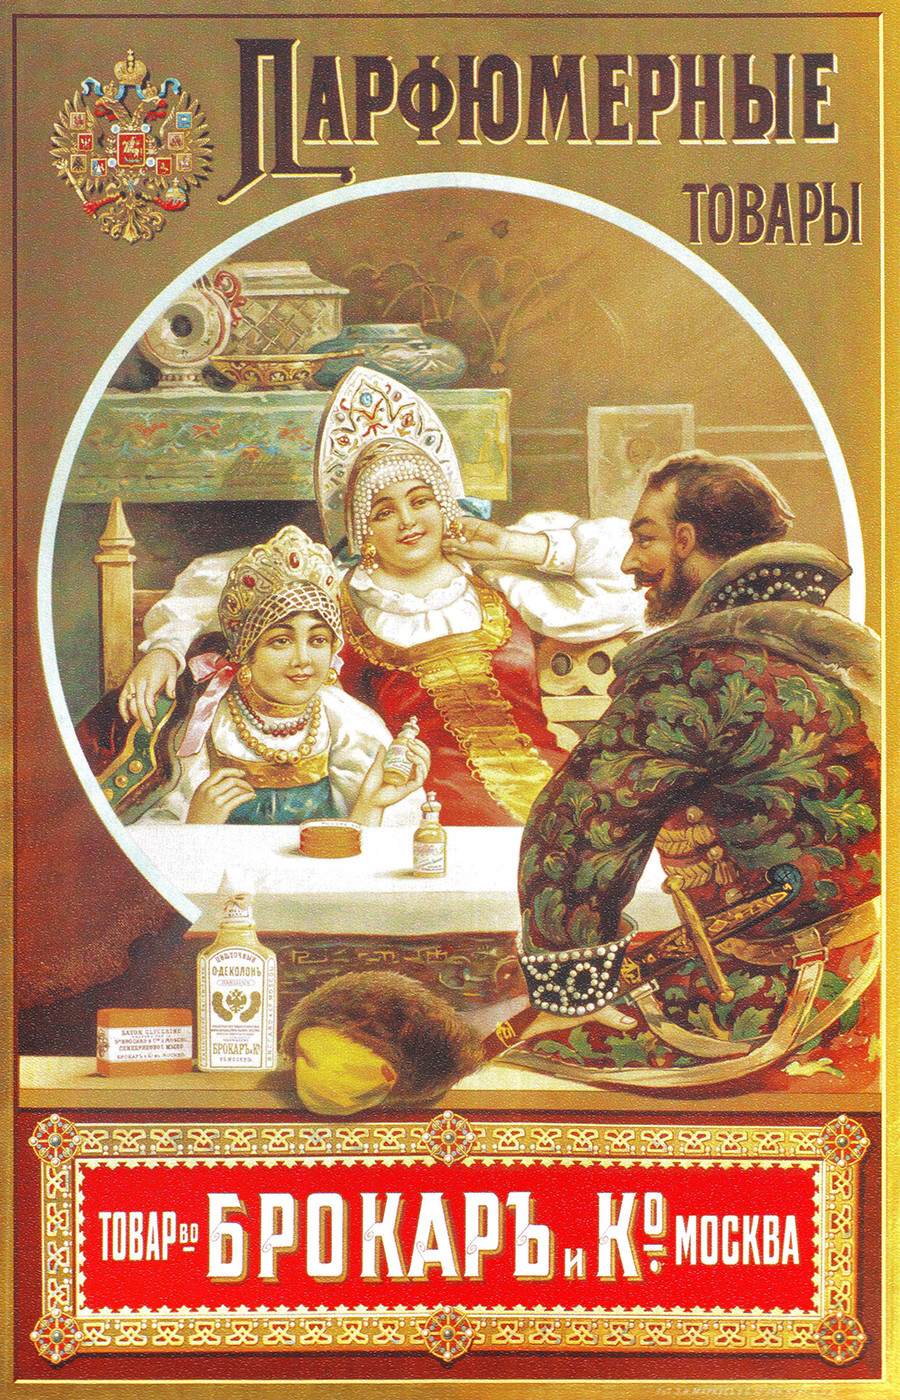 Brocard's Russia-themed advertising poster